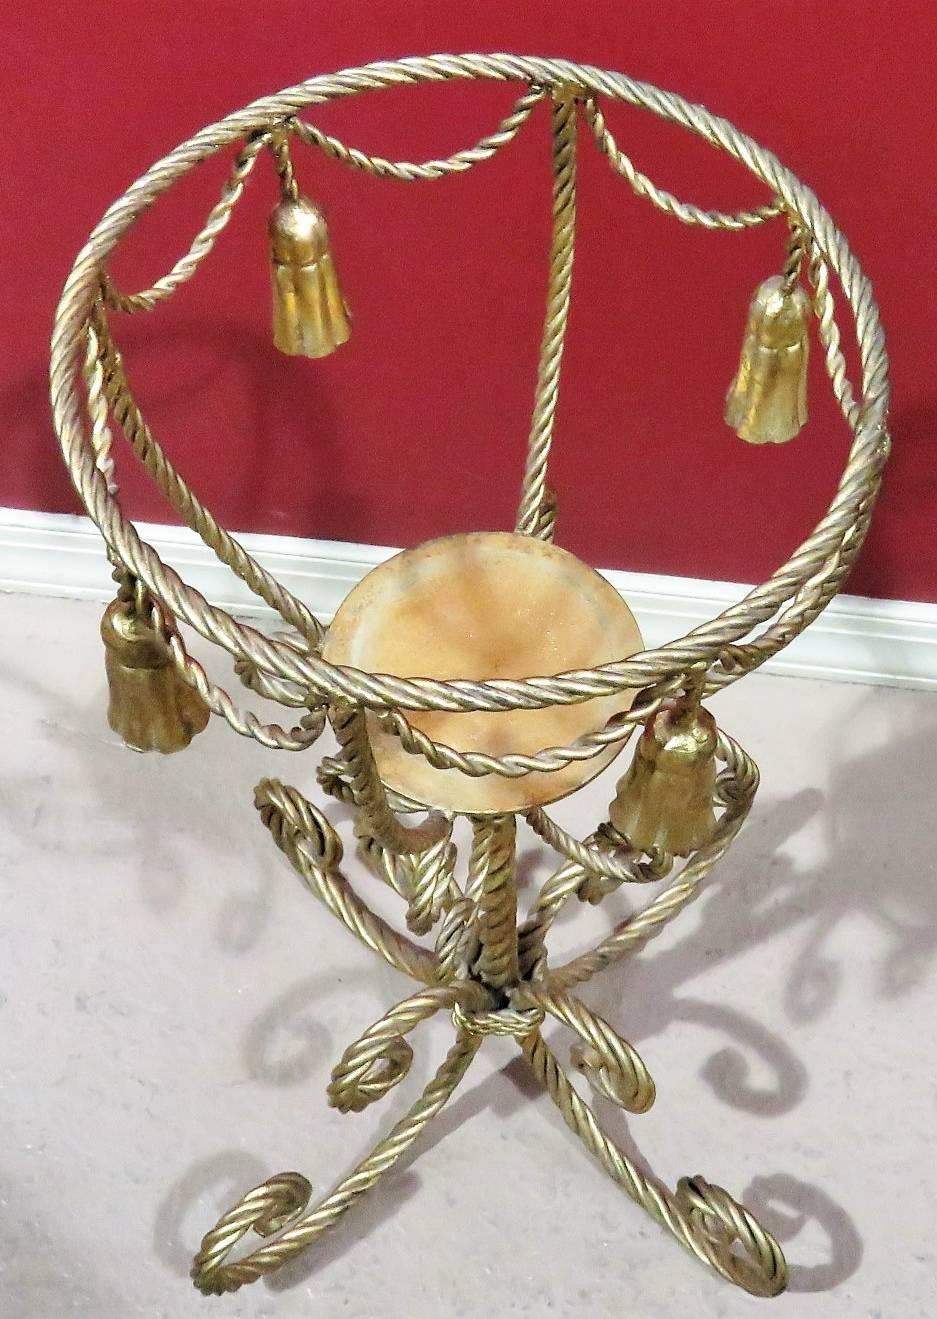 Gilt painted metal rope twist frame with tassels.